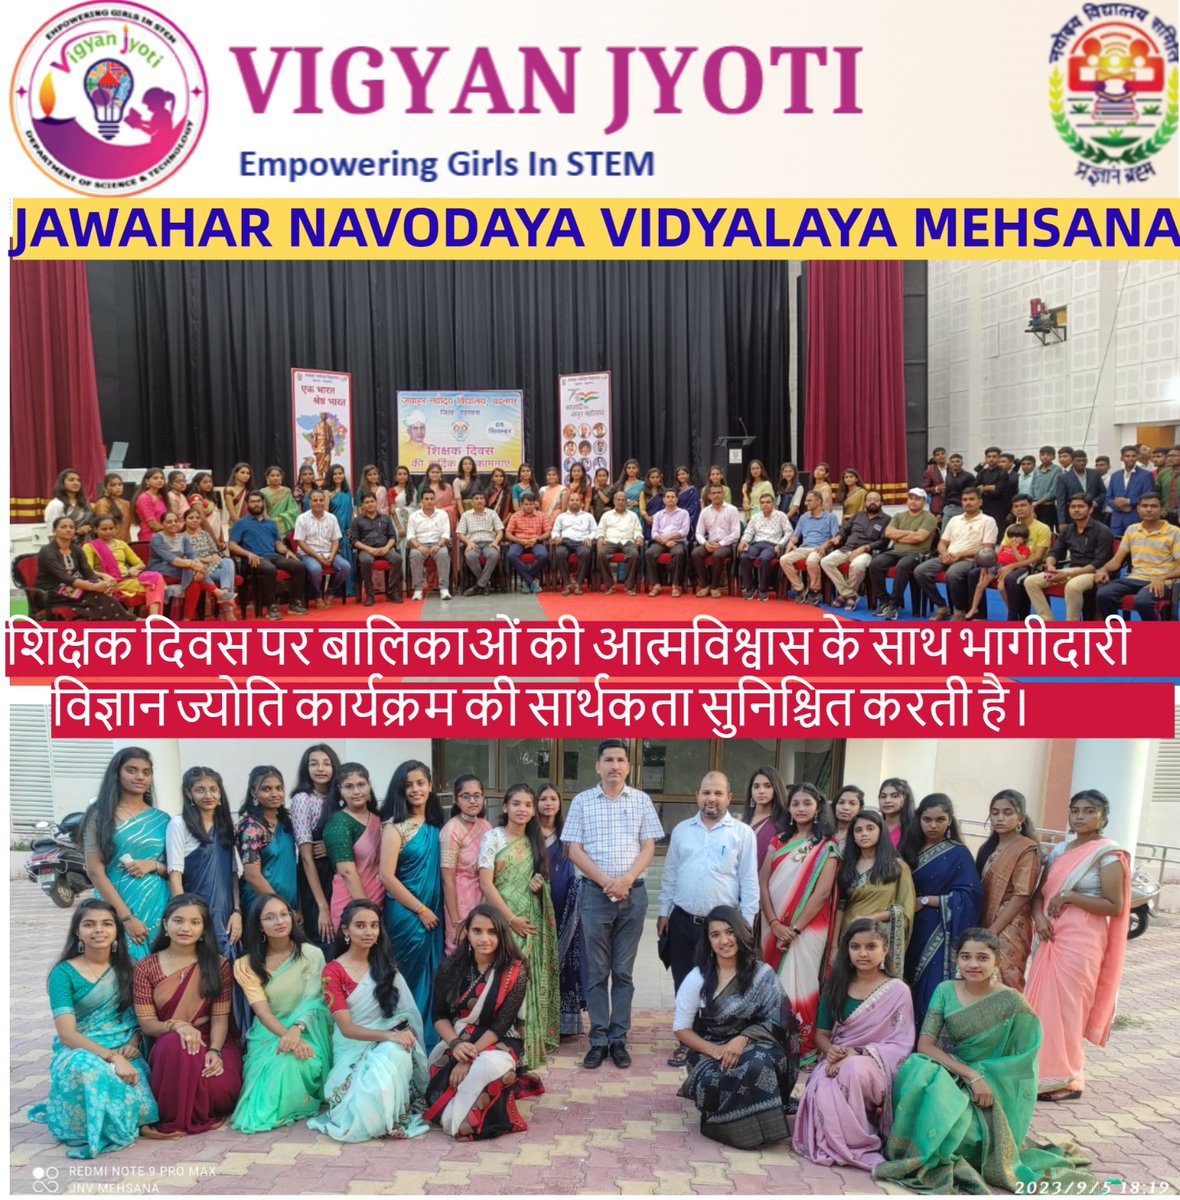 Participation of #GirlsStudents of #JnvMehsans with confidence on #Teacher'sDay ensures the purpose of VigyanJyoti programme.@JyotiVigyan  @CommissionerNVS @CMOGuj @nvsropune @EduMinOfIndia @IndiaDST